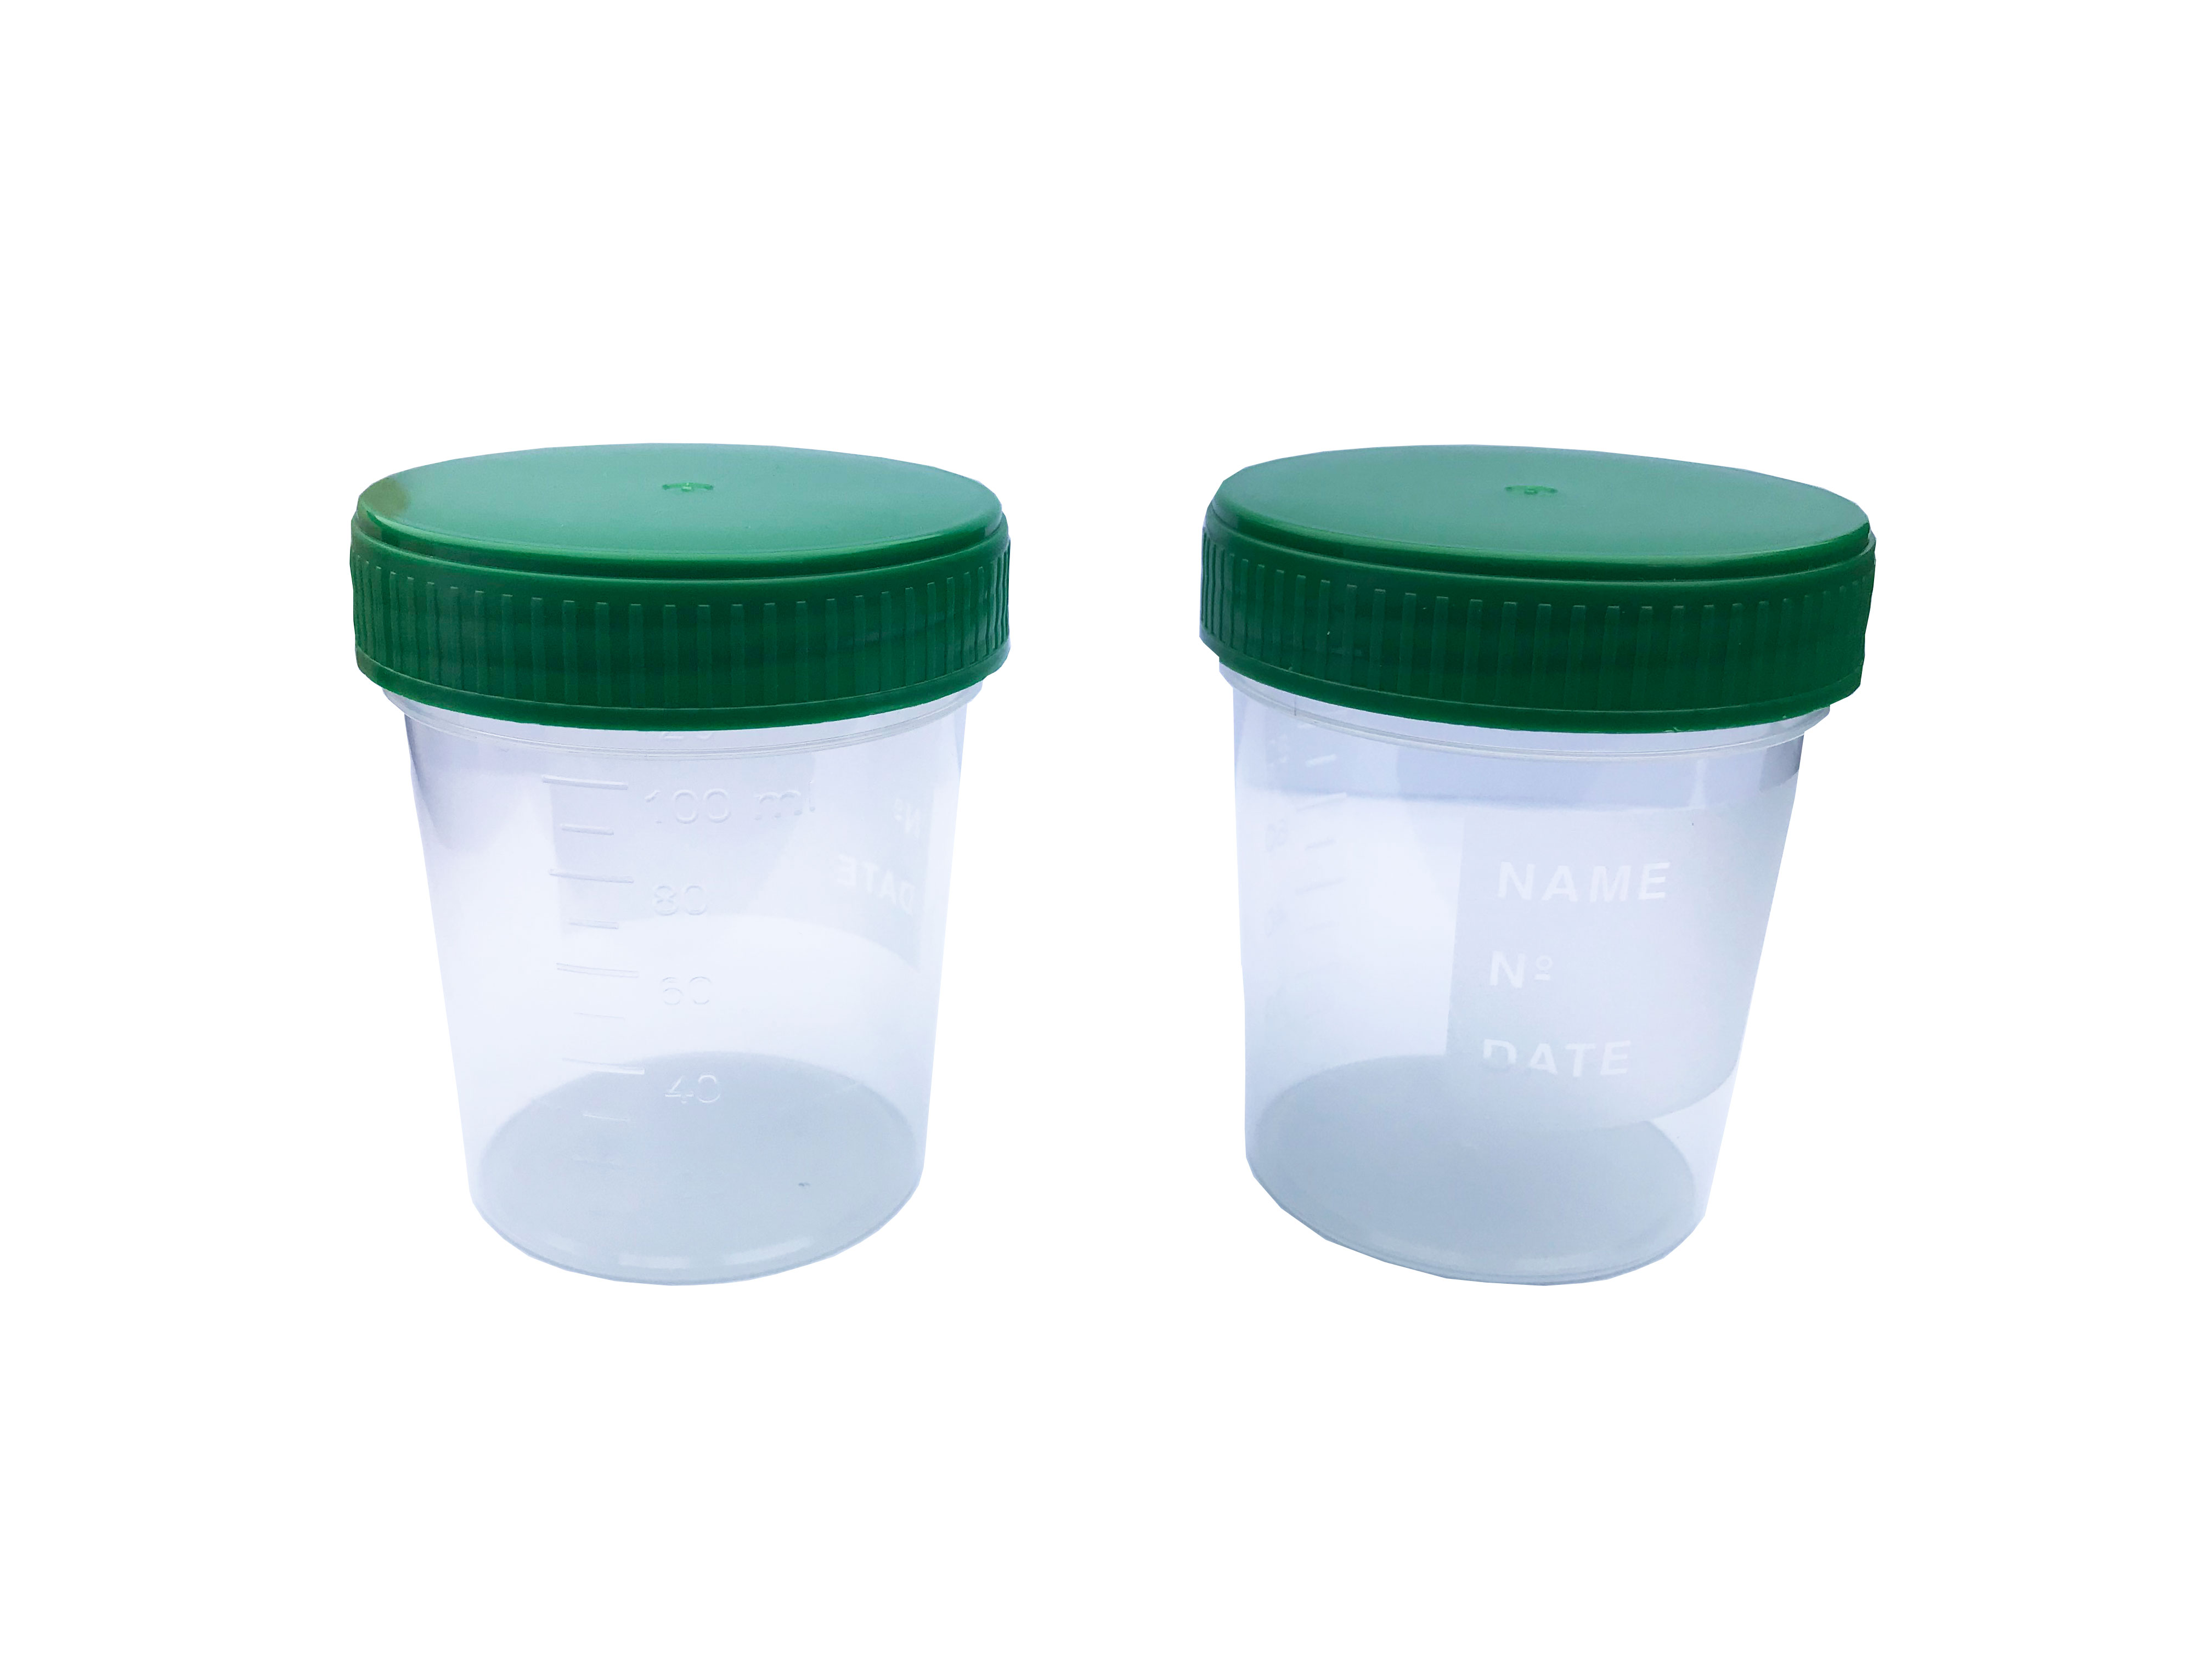 Urine & stool containers